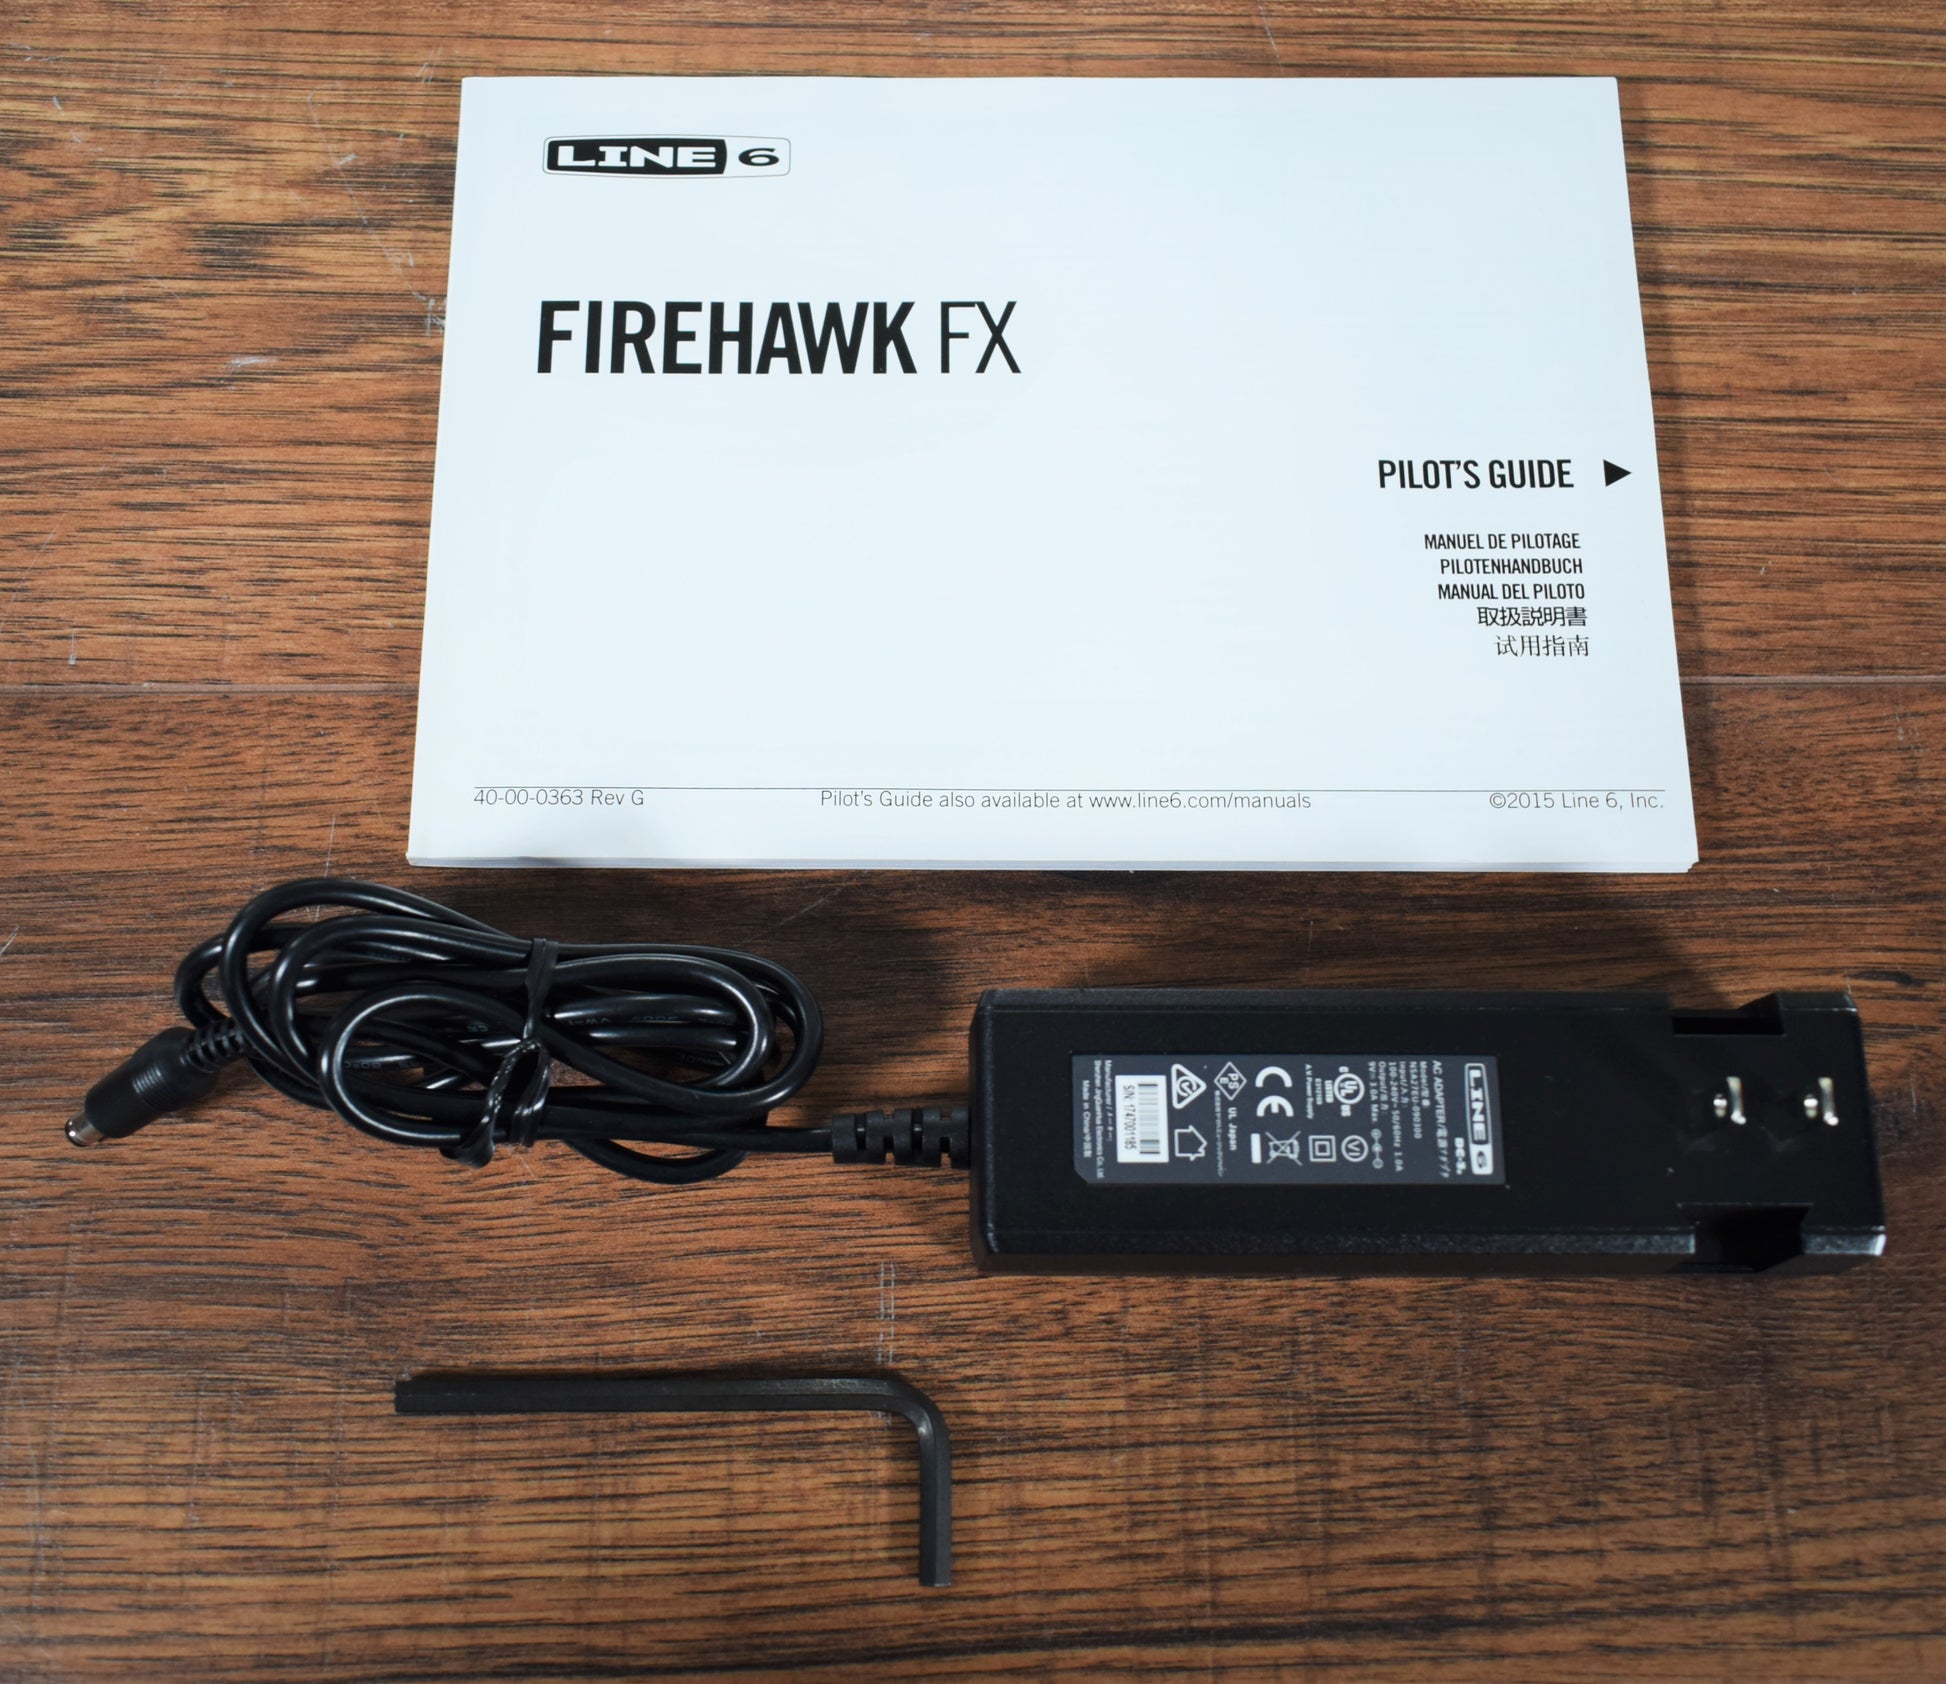 Line 6 Firehawk FX multi-effect pedal introduced at NAMM